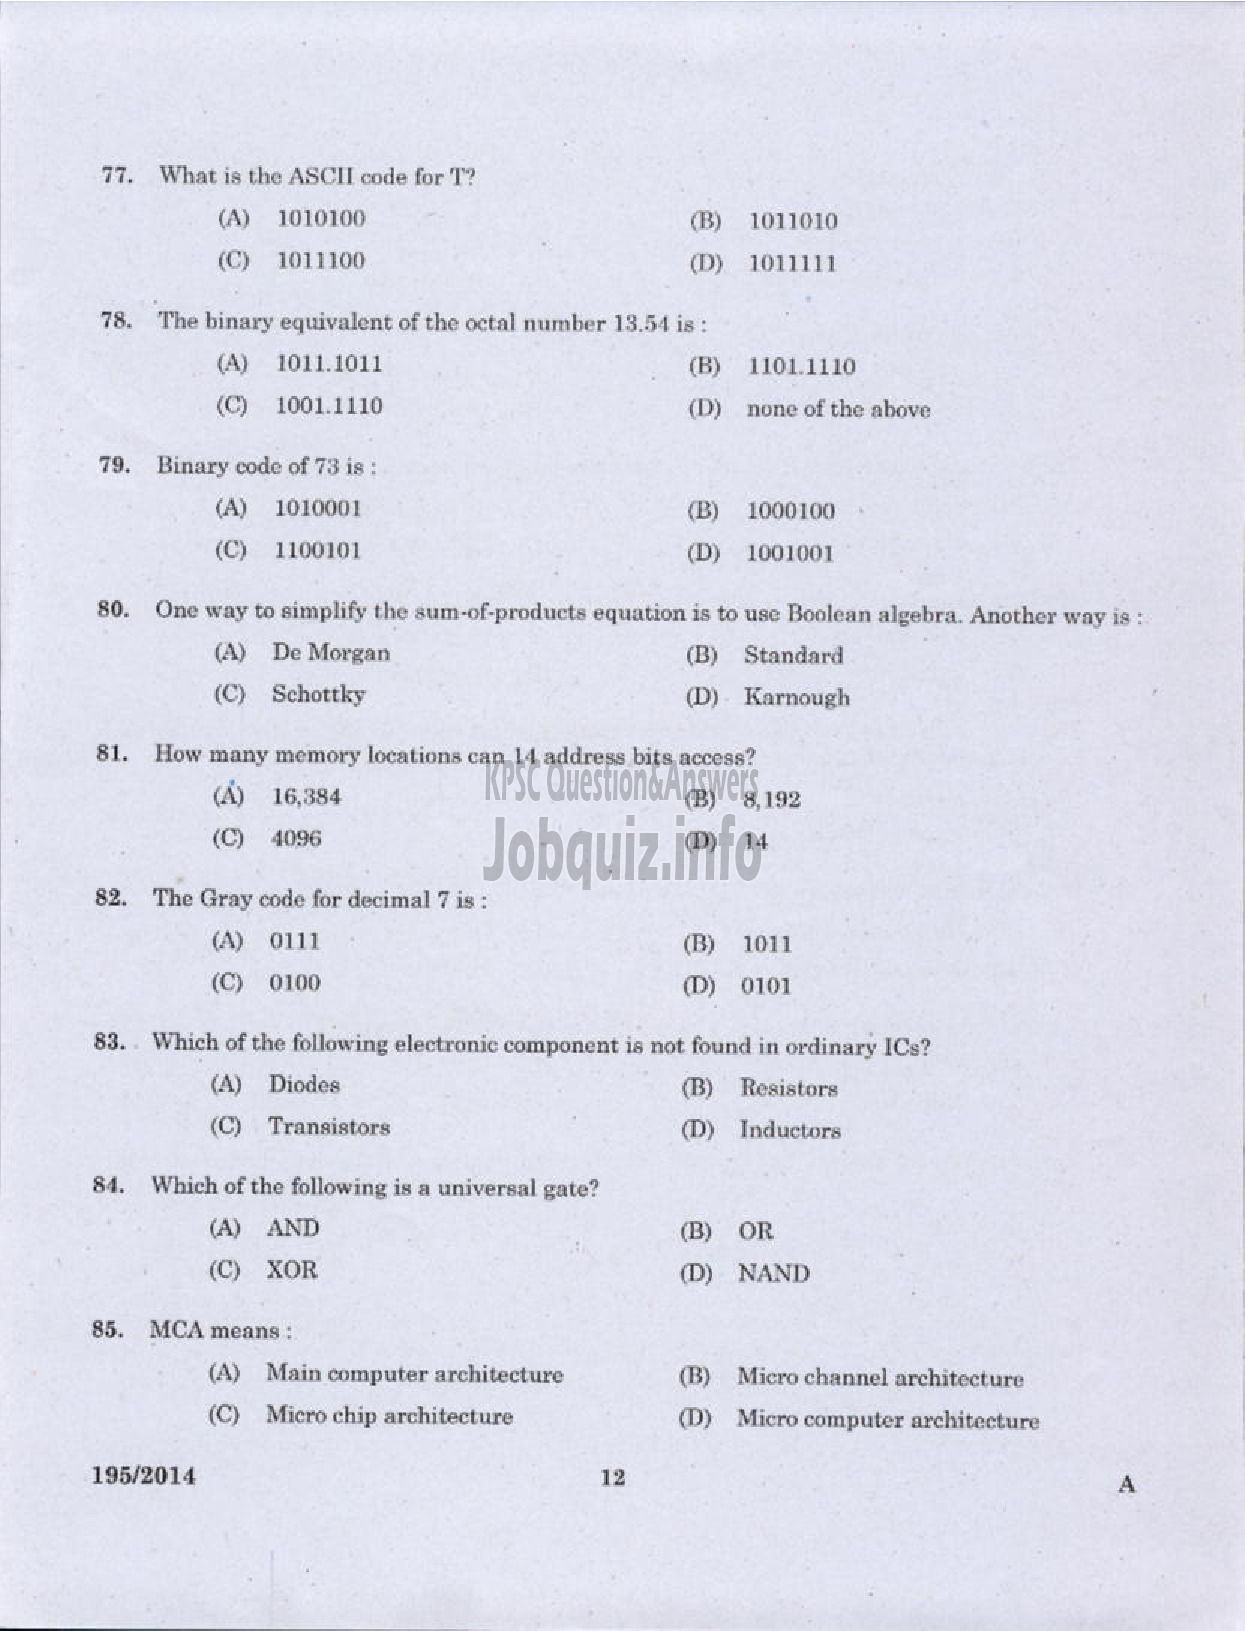 Kerala PSC Question Paper - COMPUTER PROGRAMMER CUM OPERATOR KERALA STATE BEVERAGES / MANUFACTURING AND MARKETING CORPORATION LTD-10